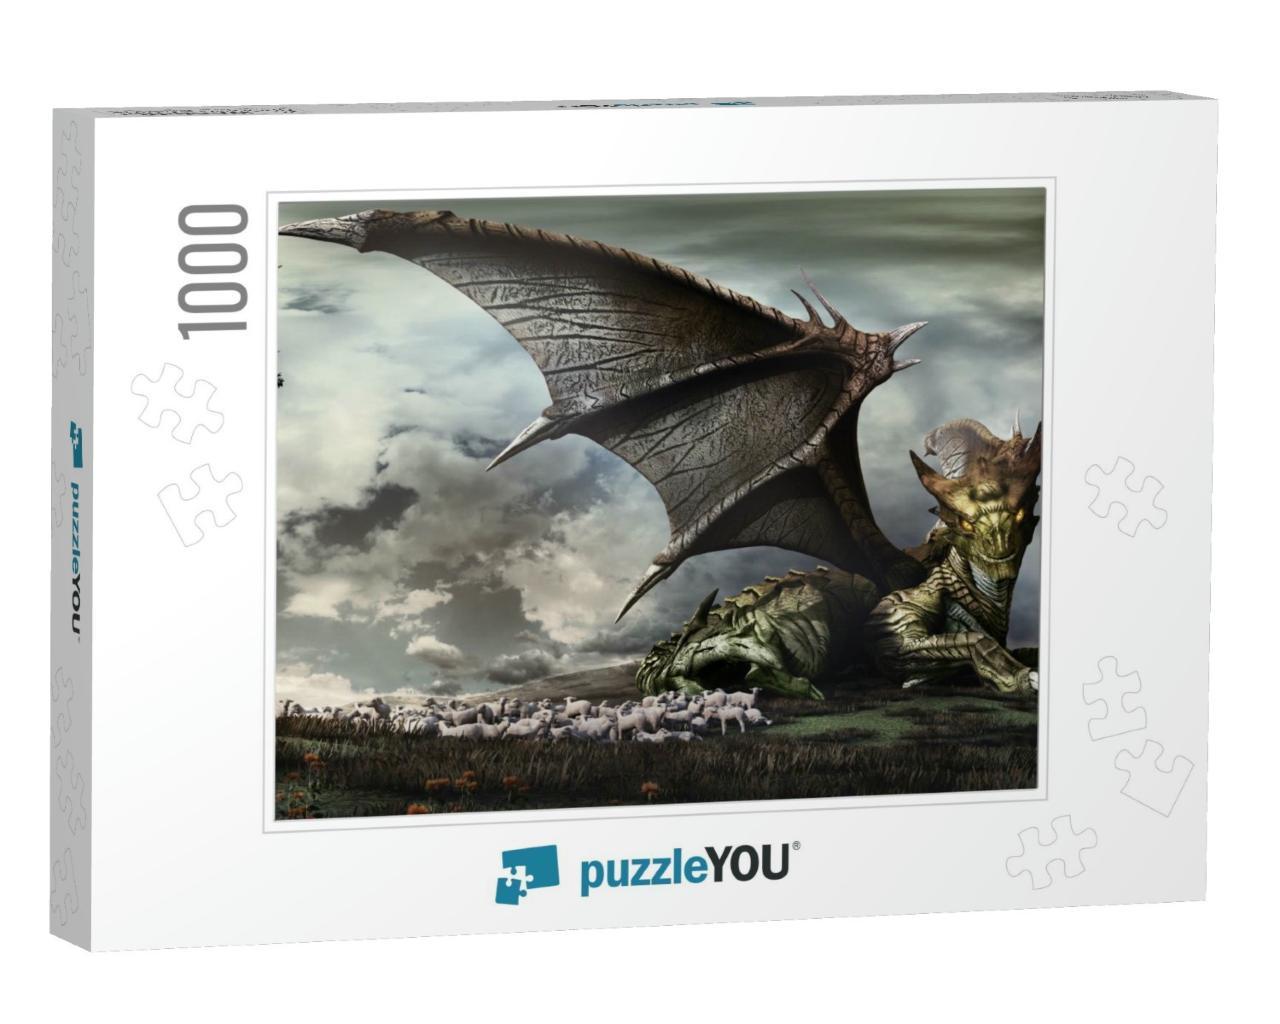 Fantasy Landscape with Dragon Guarding a Flock of Sheep... Jigsaw Puzzle with 1000 pieces